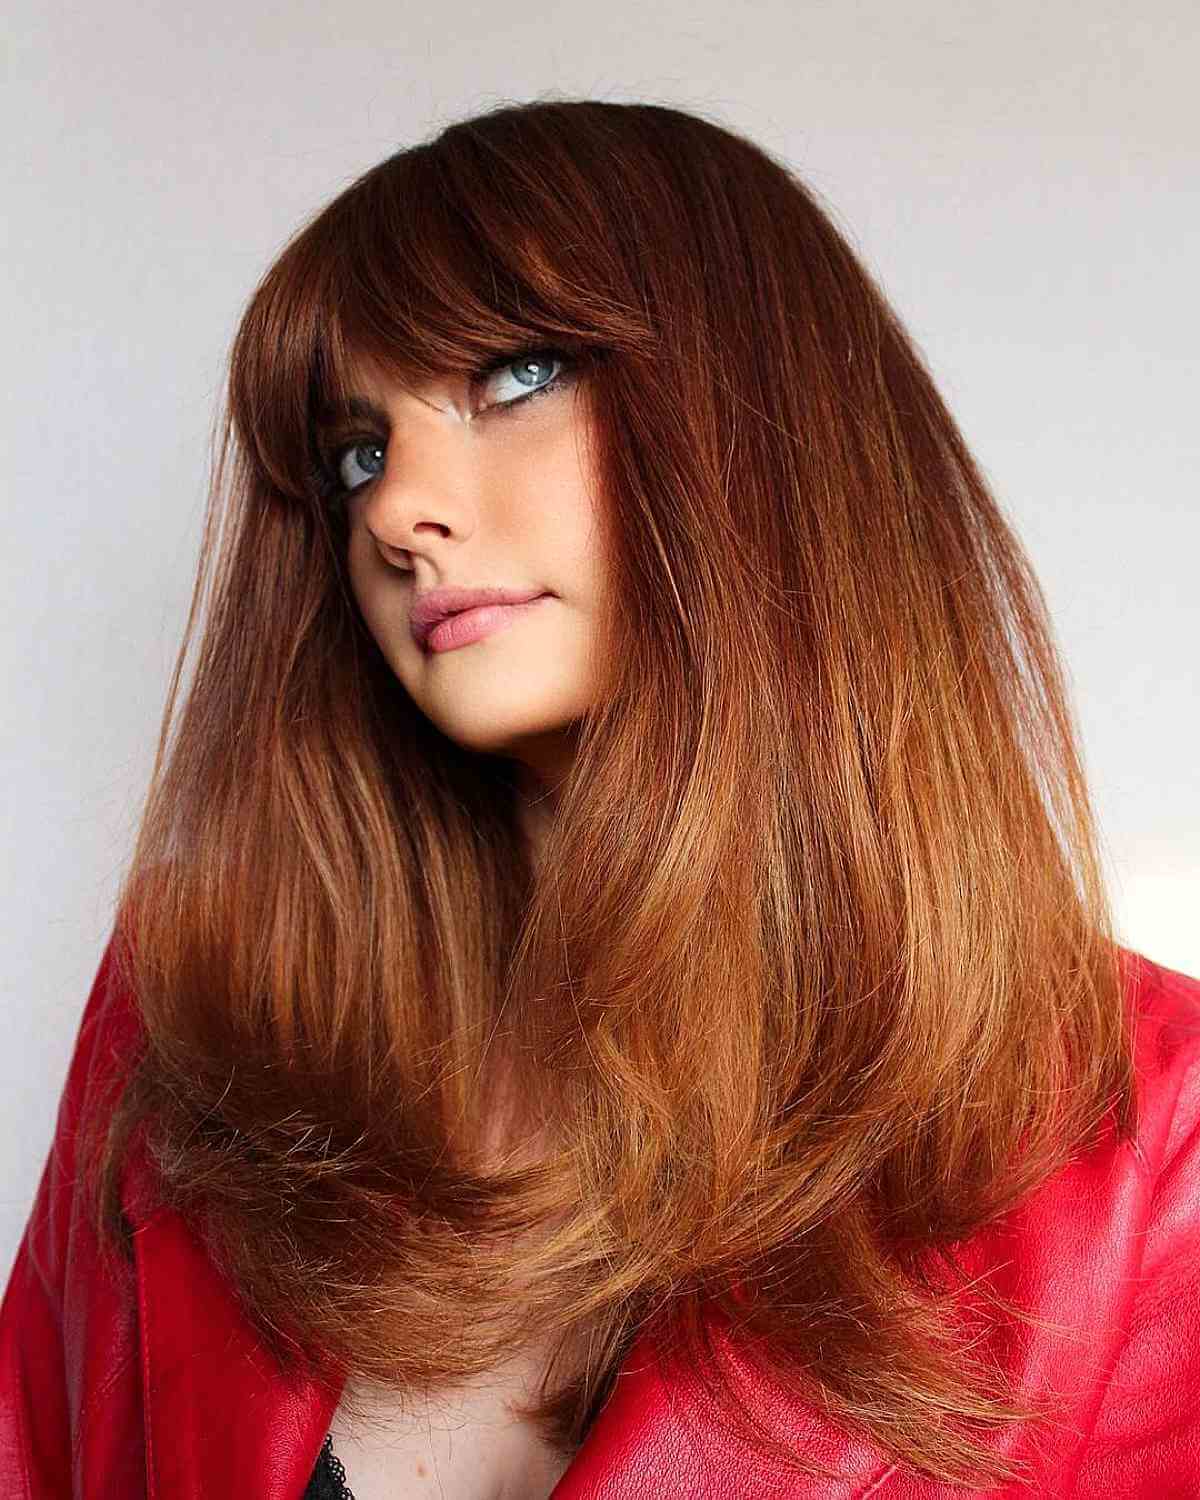 Vintage Mod Hairstyle with Bangs